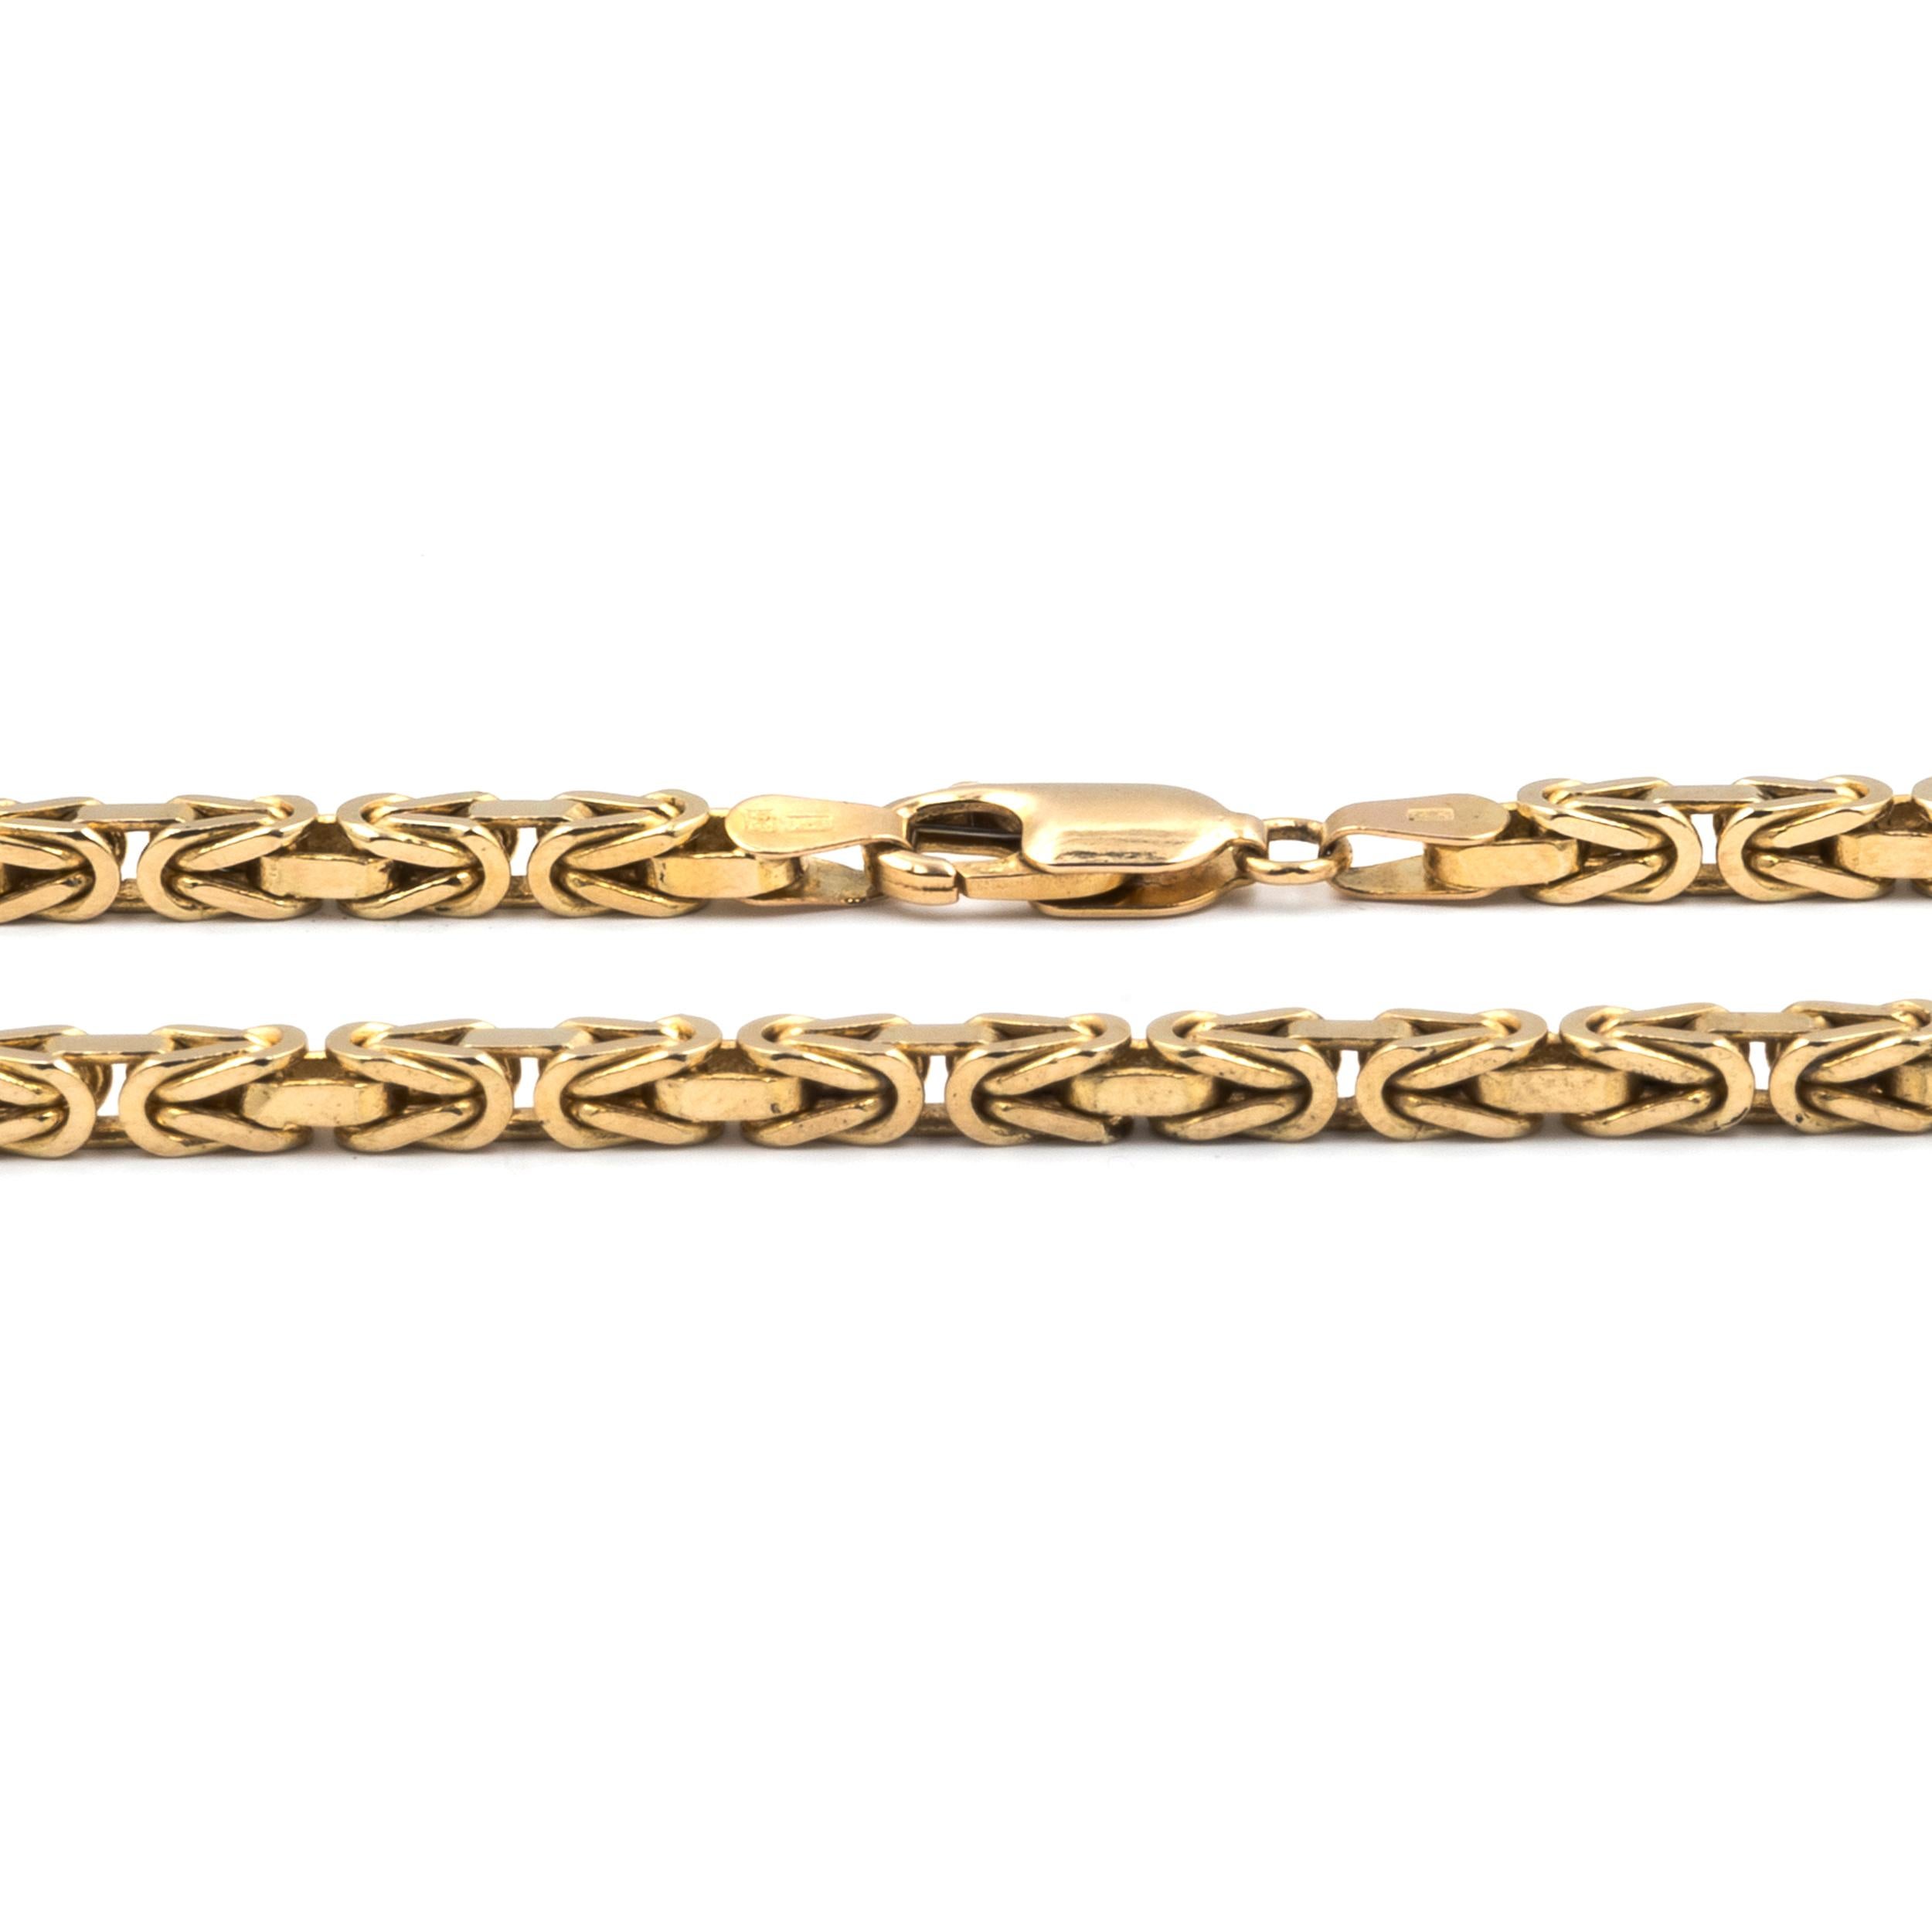 Designer: custom
Material: 14K yellow gold
Weight: 37.61 grams
Measurement: necklace measures 18.5-inches long, 3.4mm wide
